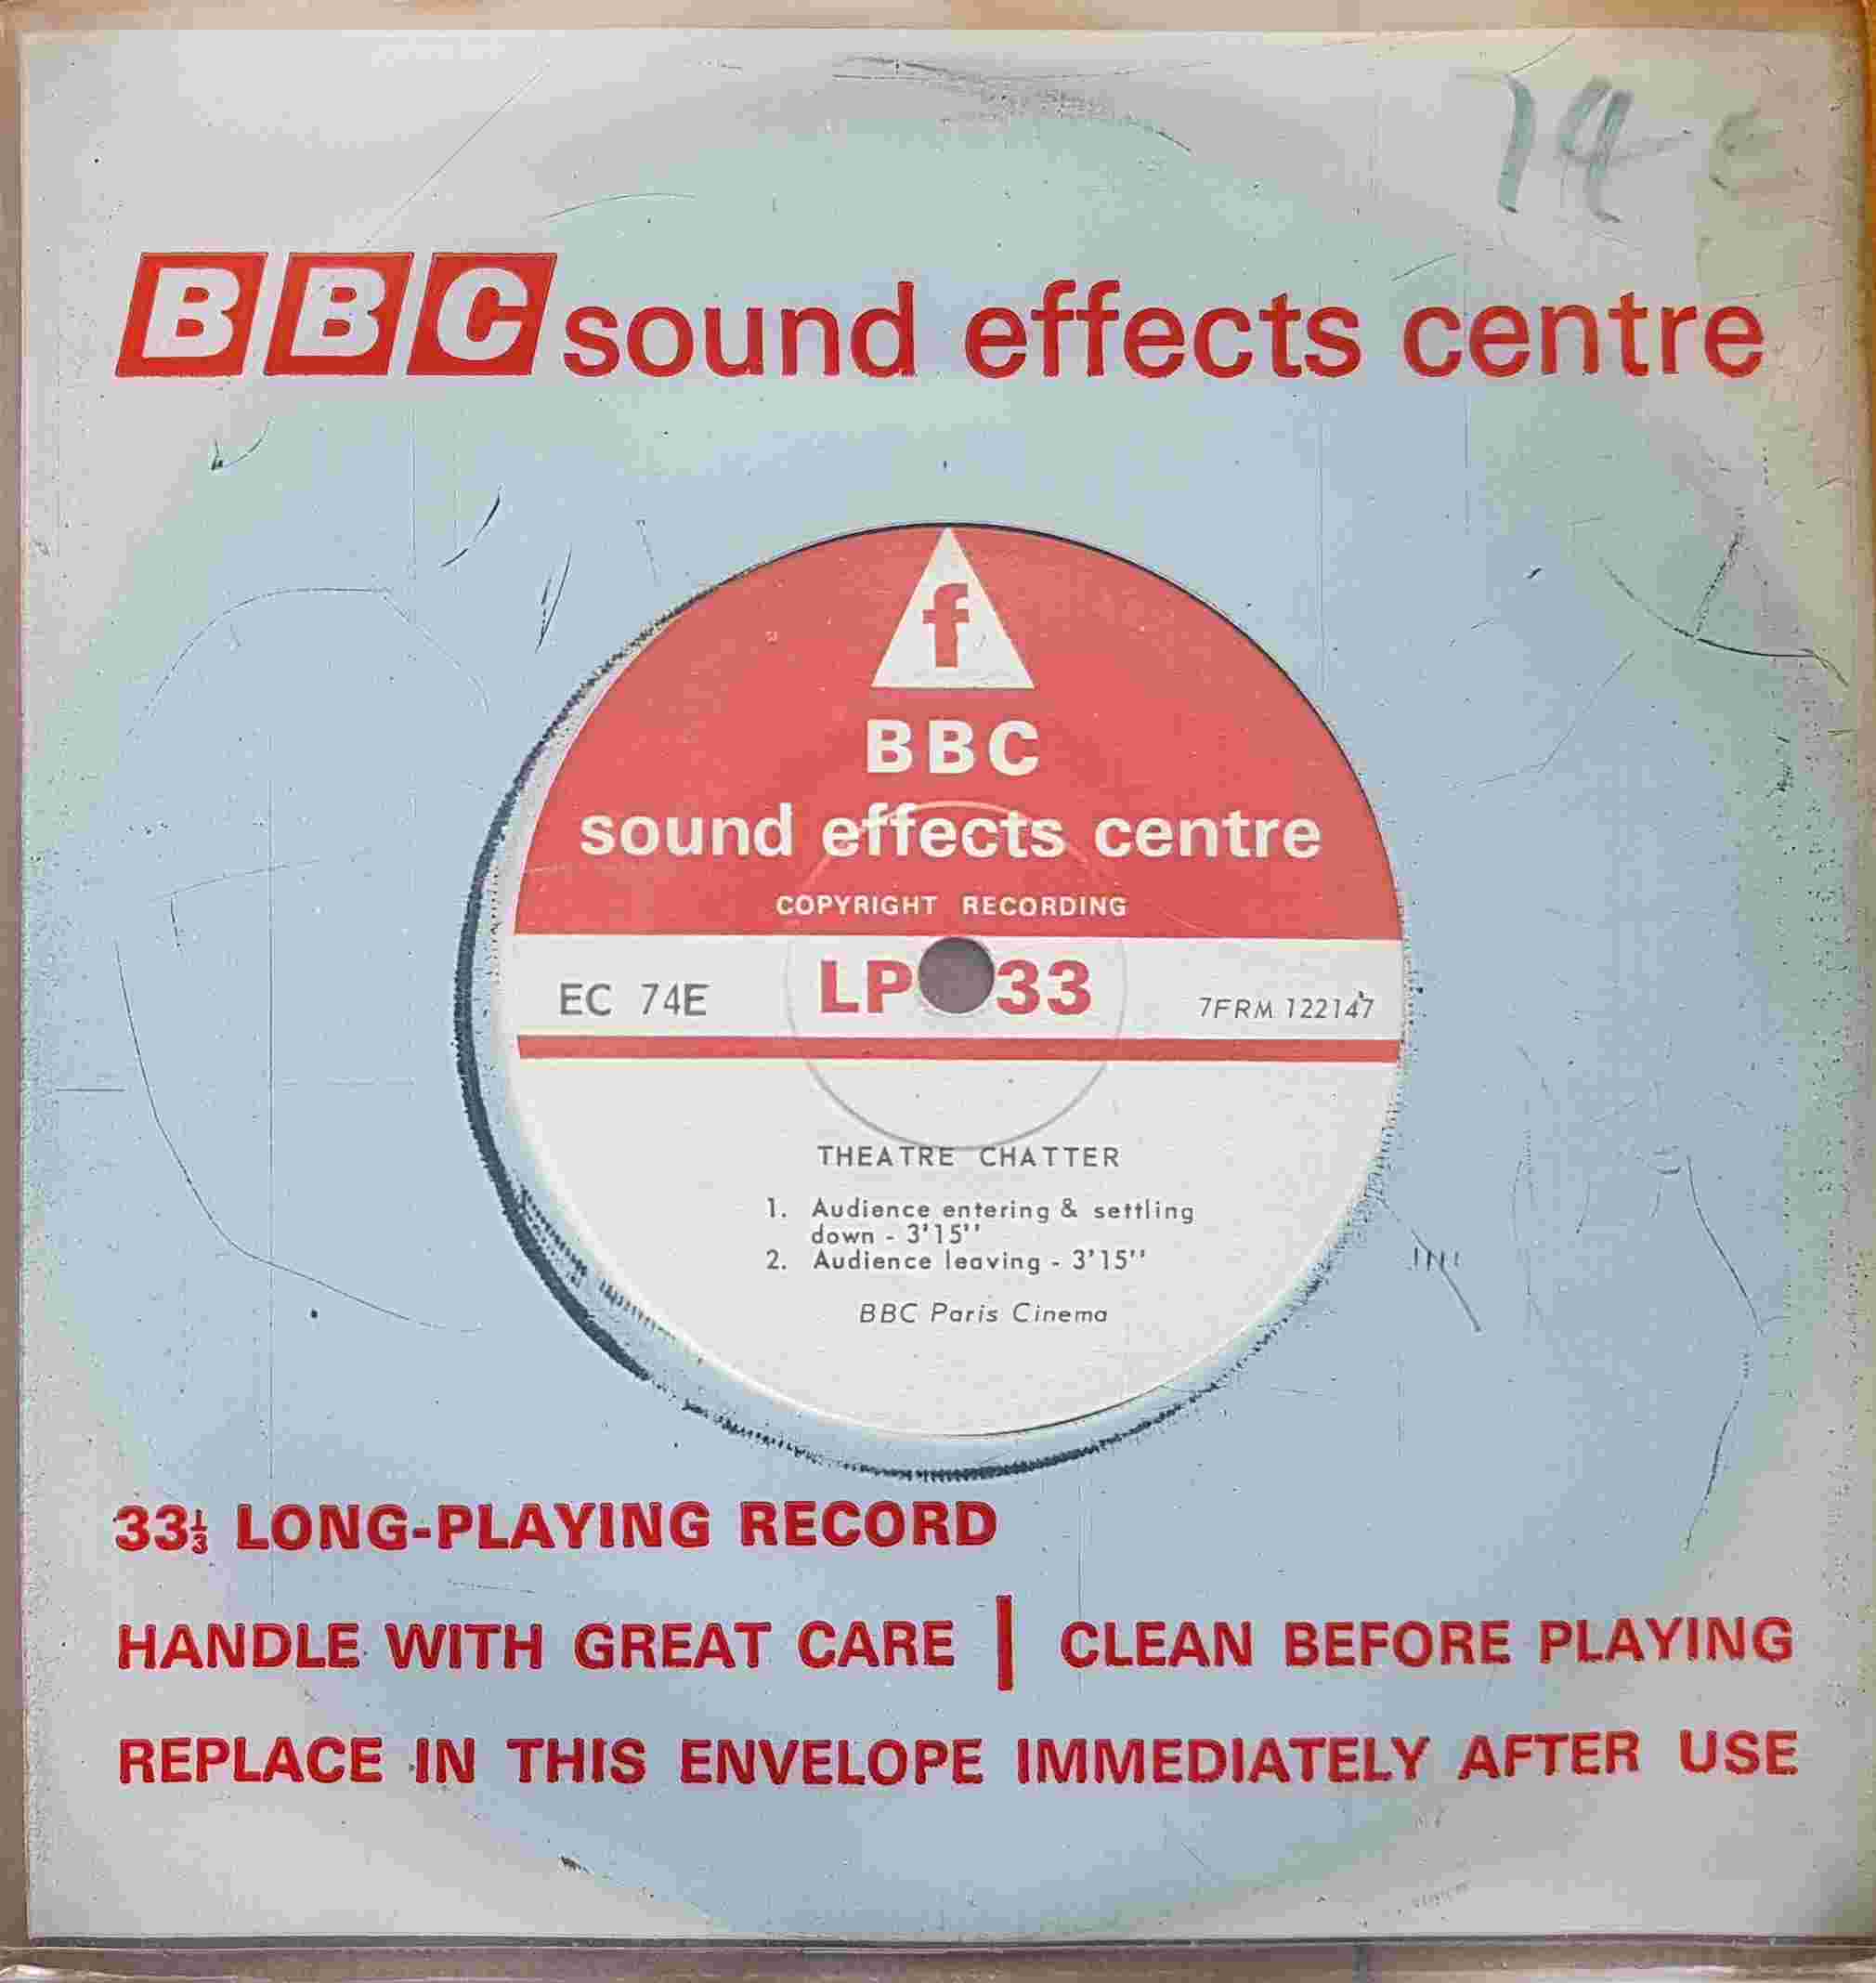 Picture of EC 74E Theatre chatter - BBC Paris Cinema by artist Not registered from the BBC records and Tapes library